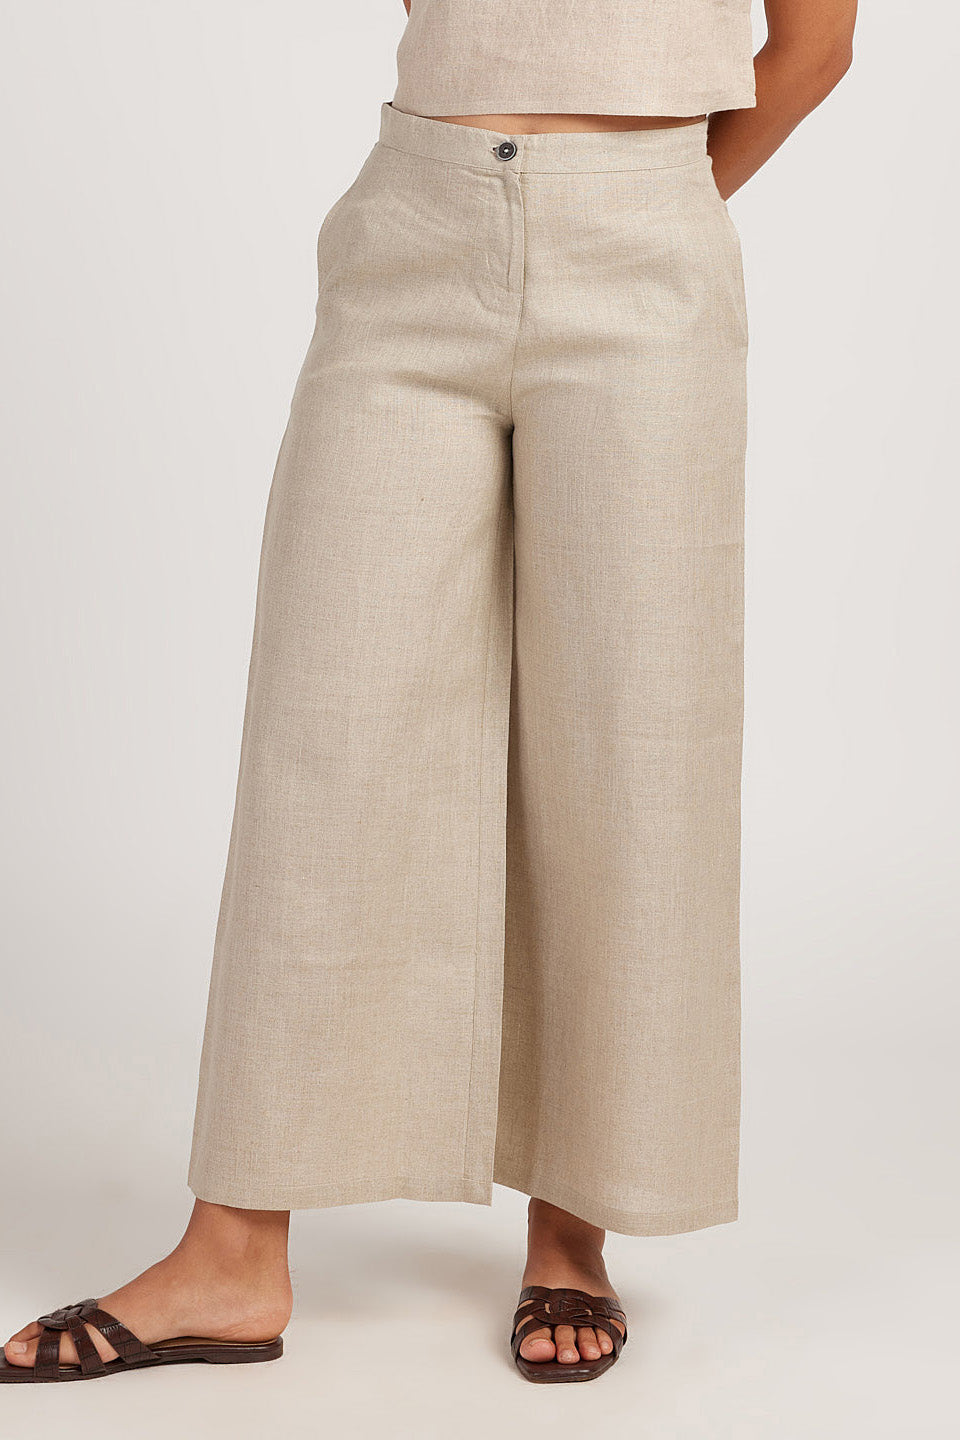 Buy Indianna Wide Leg Pants - Forever New